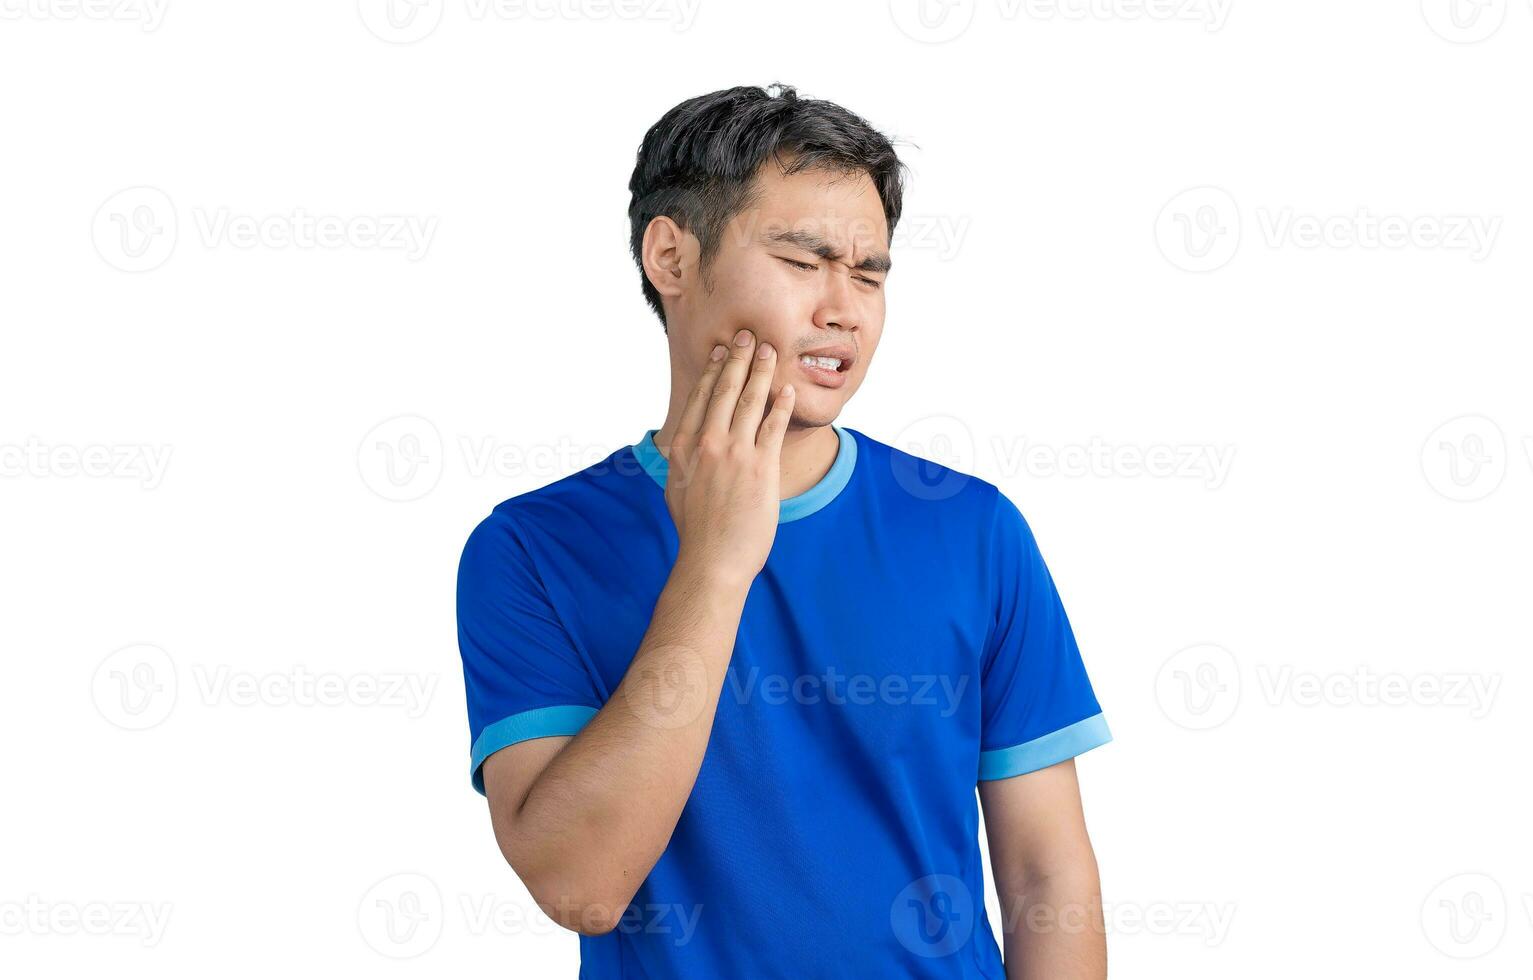 Young Asian man touching mouth suffering from toothache or dental illness on teeth isolated on white background. Male feeling pain, holding his cheek with hand, suffering from bad toothache. Dentist photo